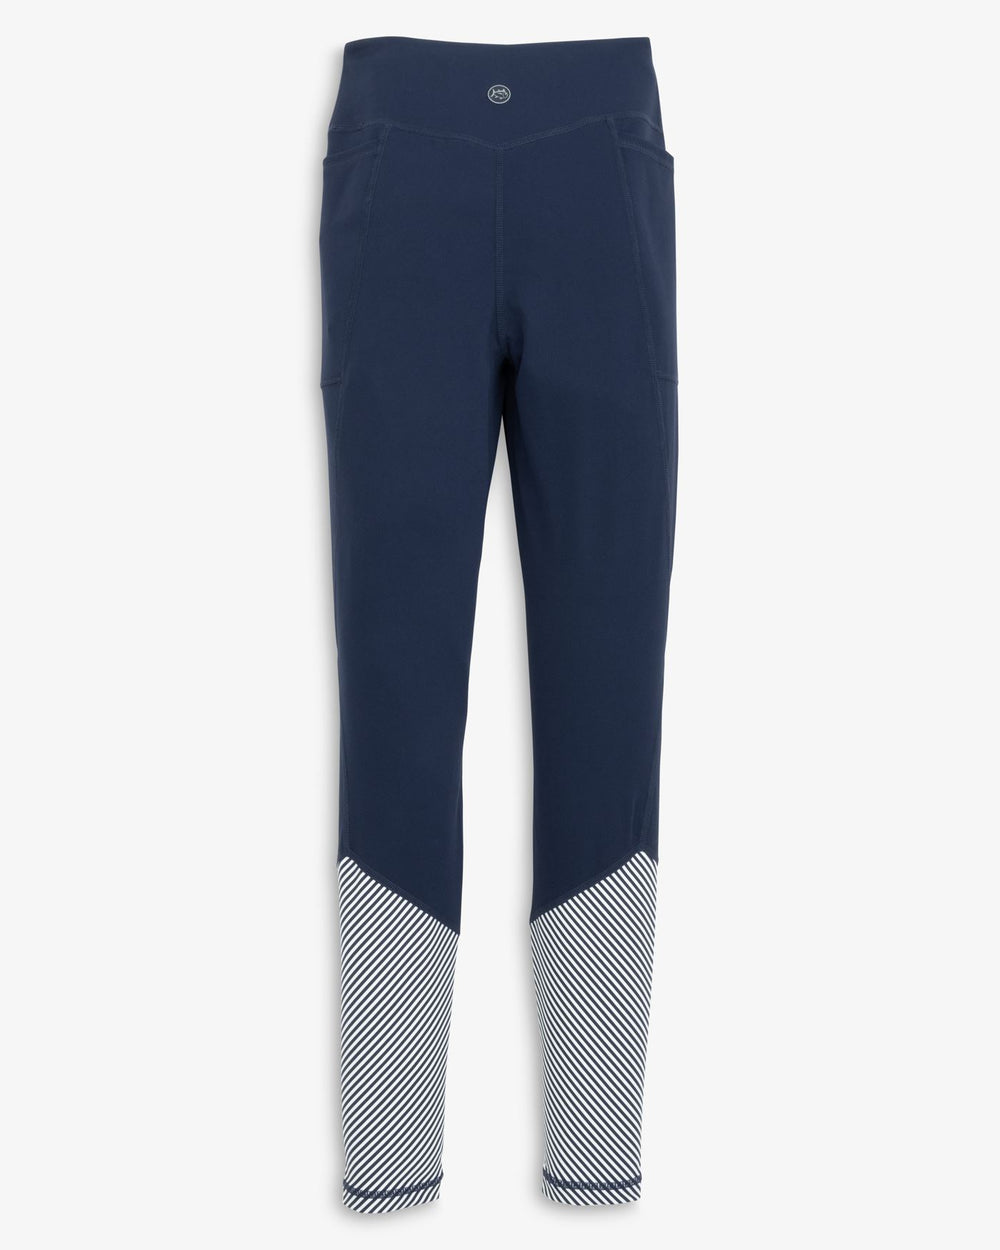 The front view of the Southern Tide Lexi Colorblock High Waisted Legging by Southern Tide - Nautical Navy